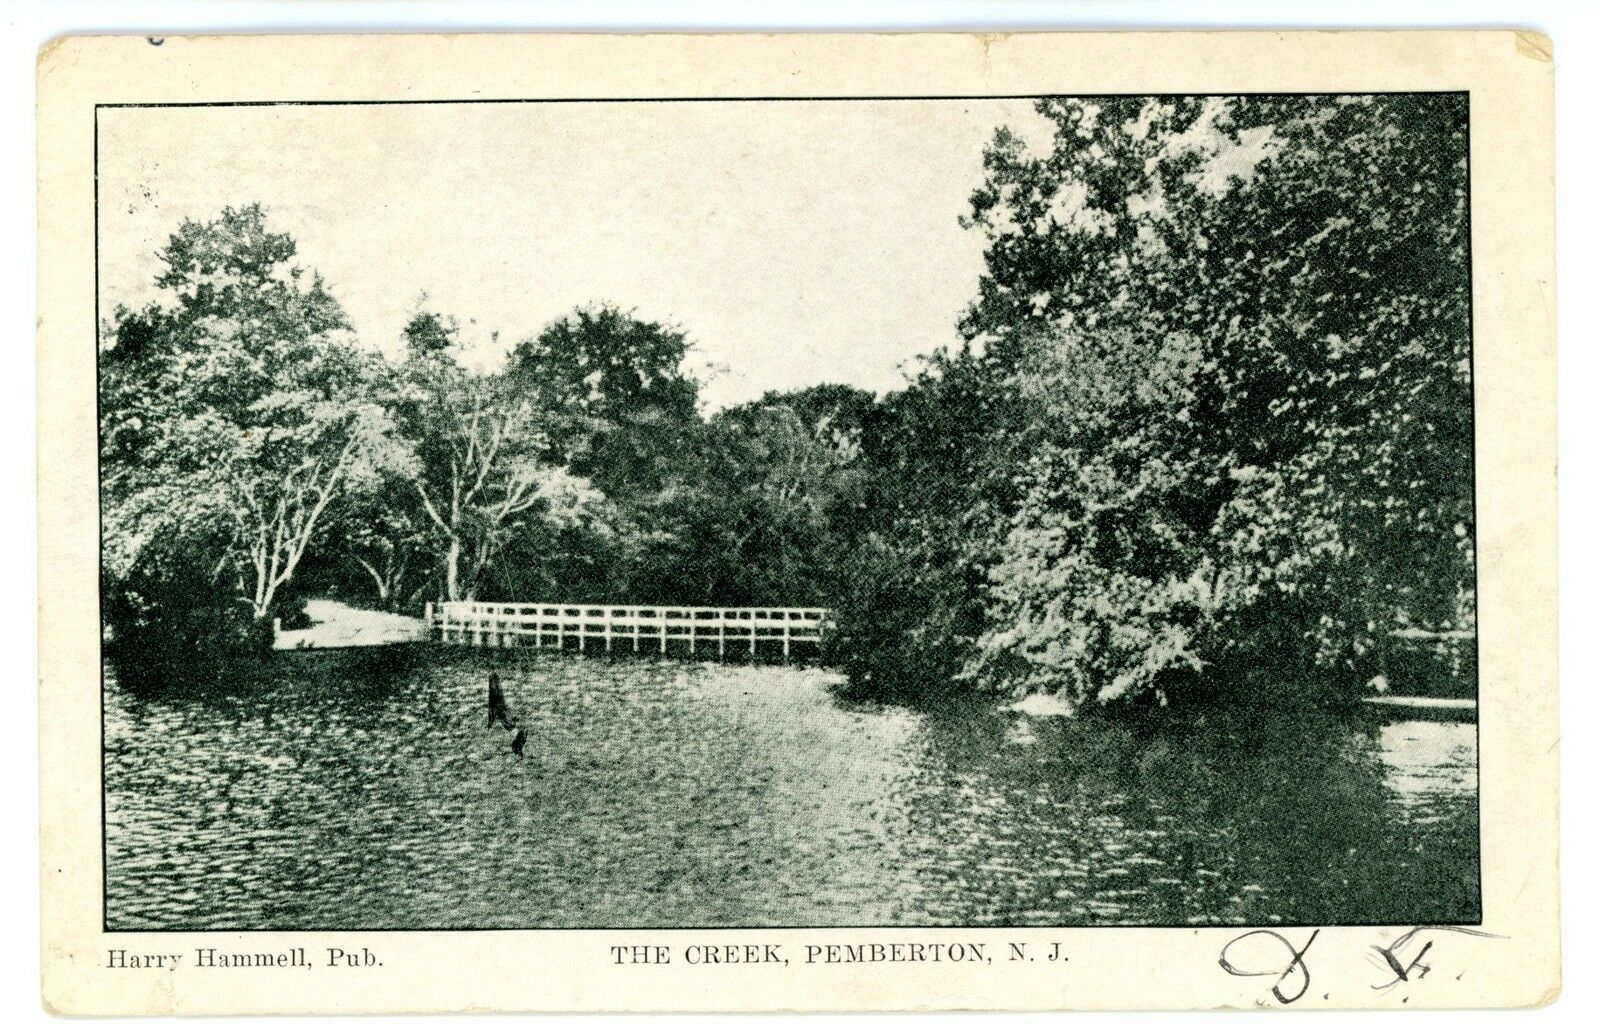 Pemberton - Apparently the North Branch of Rancocas Creek with what looks like a bridge across it - Harry Hammell - c 1910